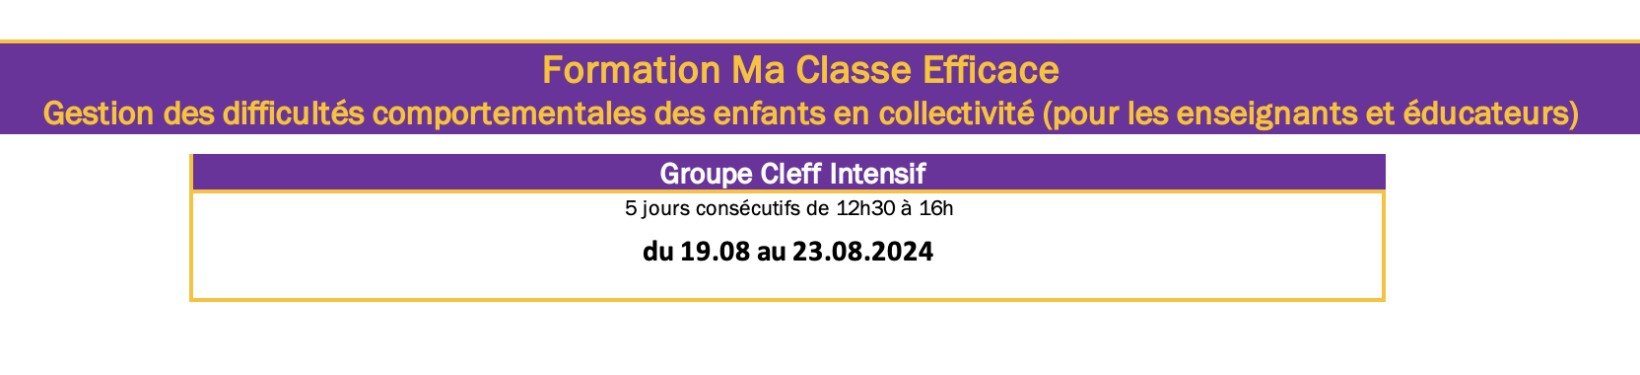 formation classe efficace